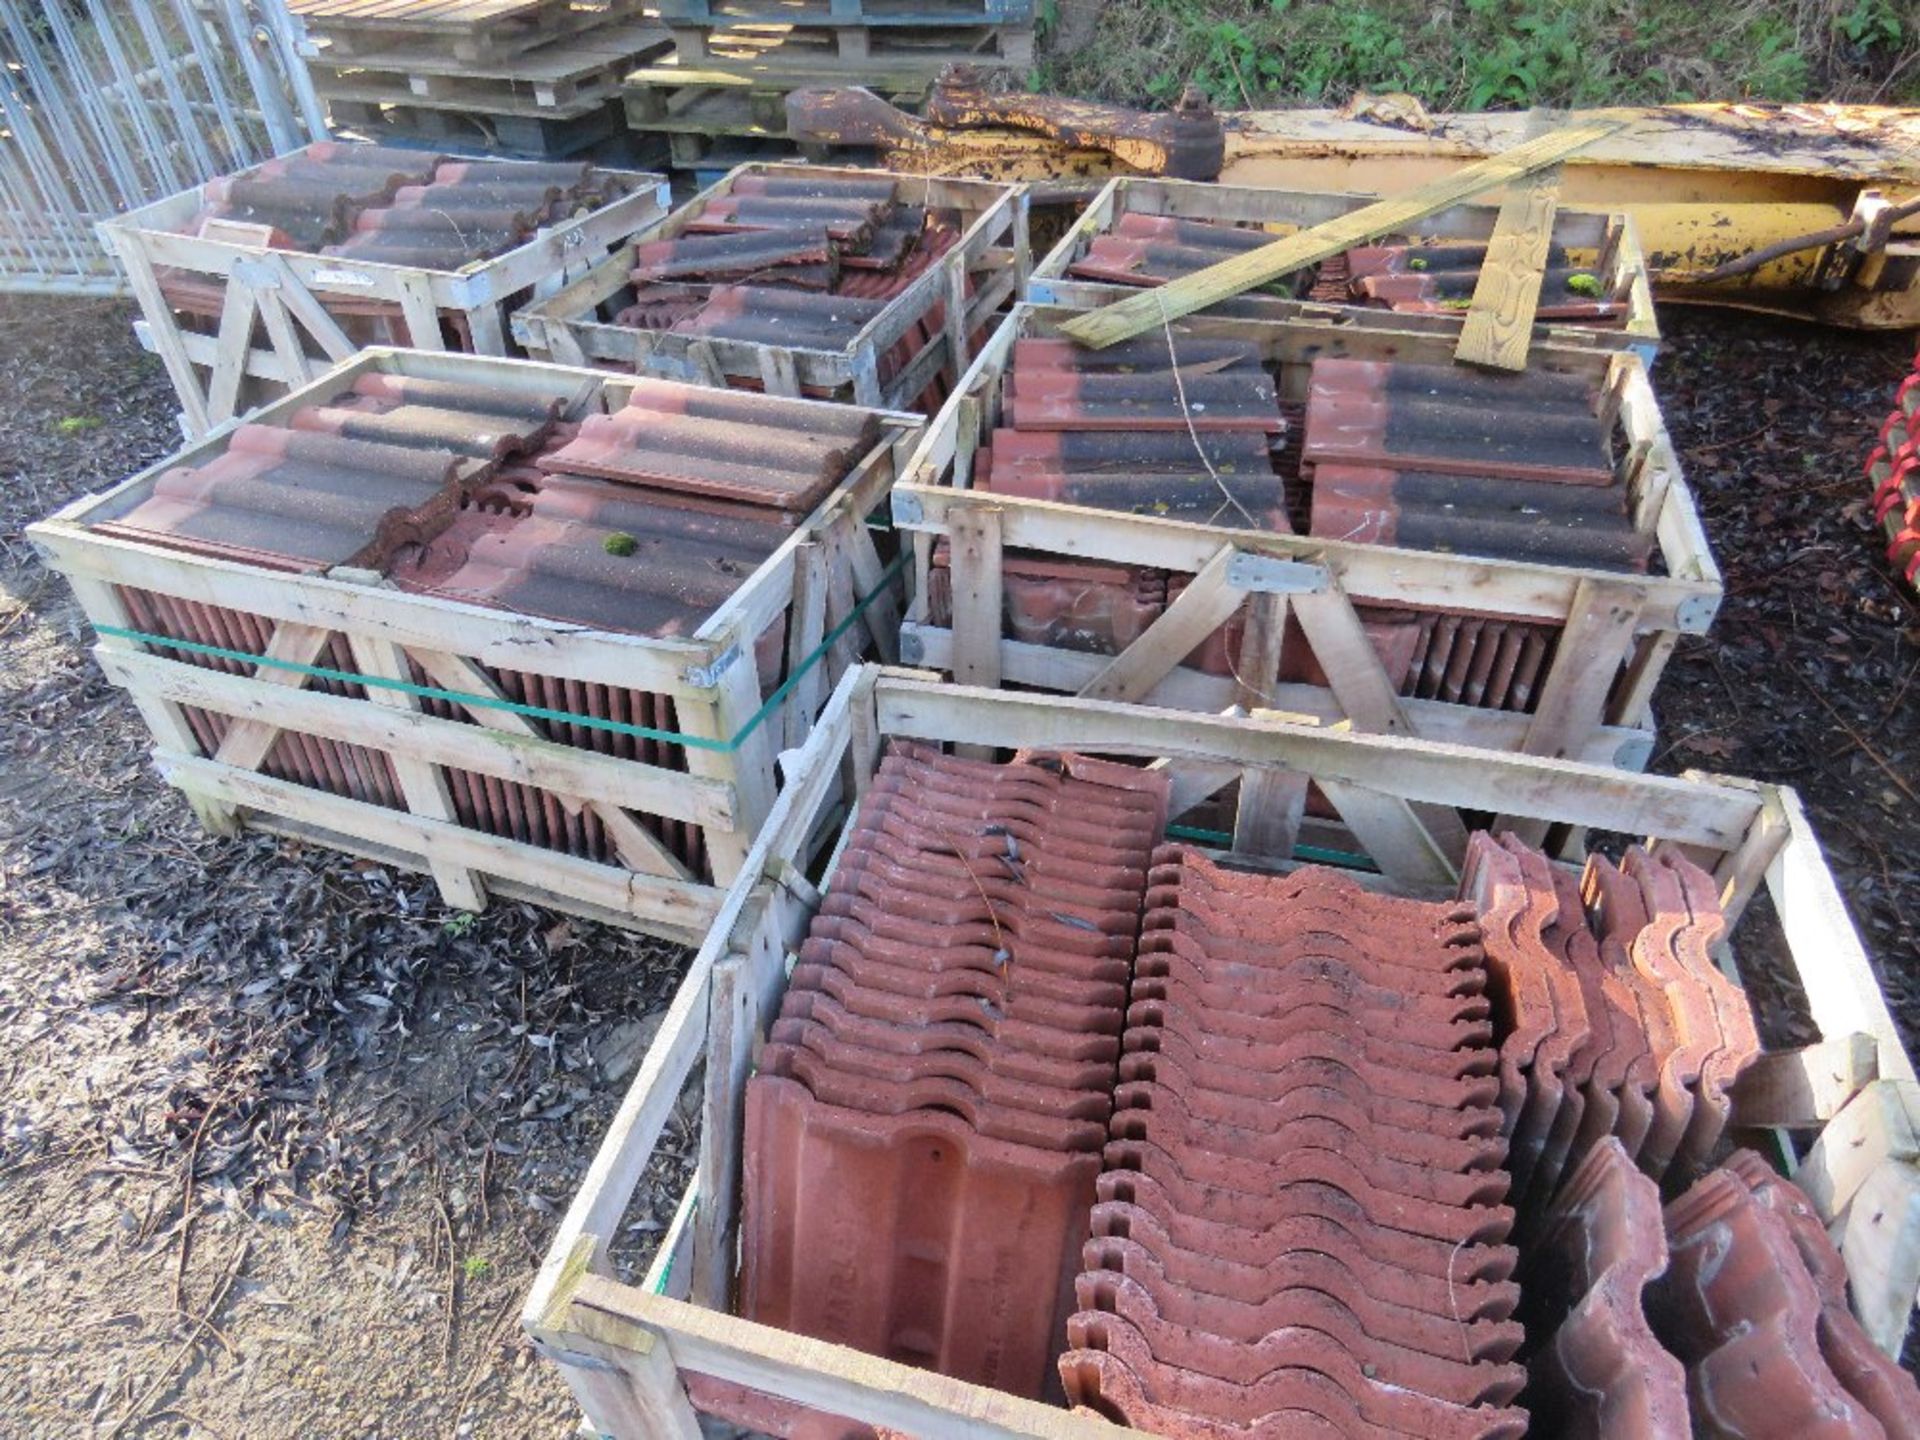 6 X STILLAGES OF REDLAND CONCRETE ROOF TILES, PRE USED. RECENTLY REMOVED FROM HOUSE BEING DEMOLISHED